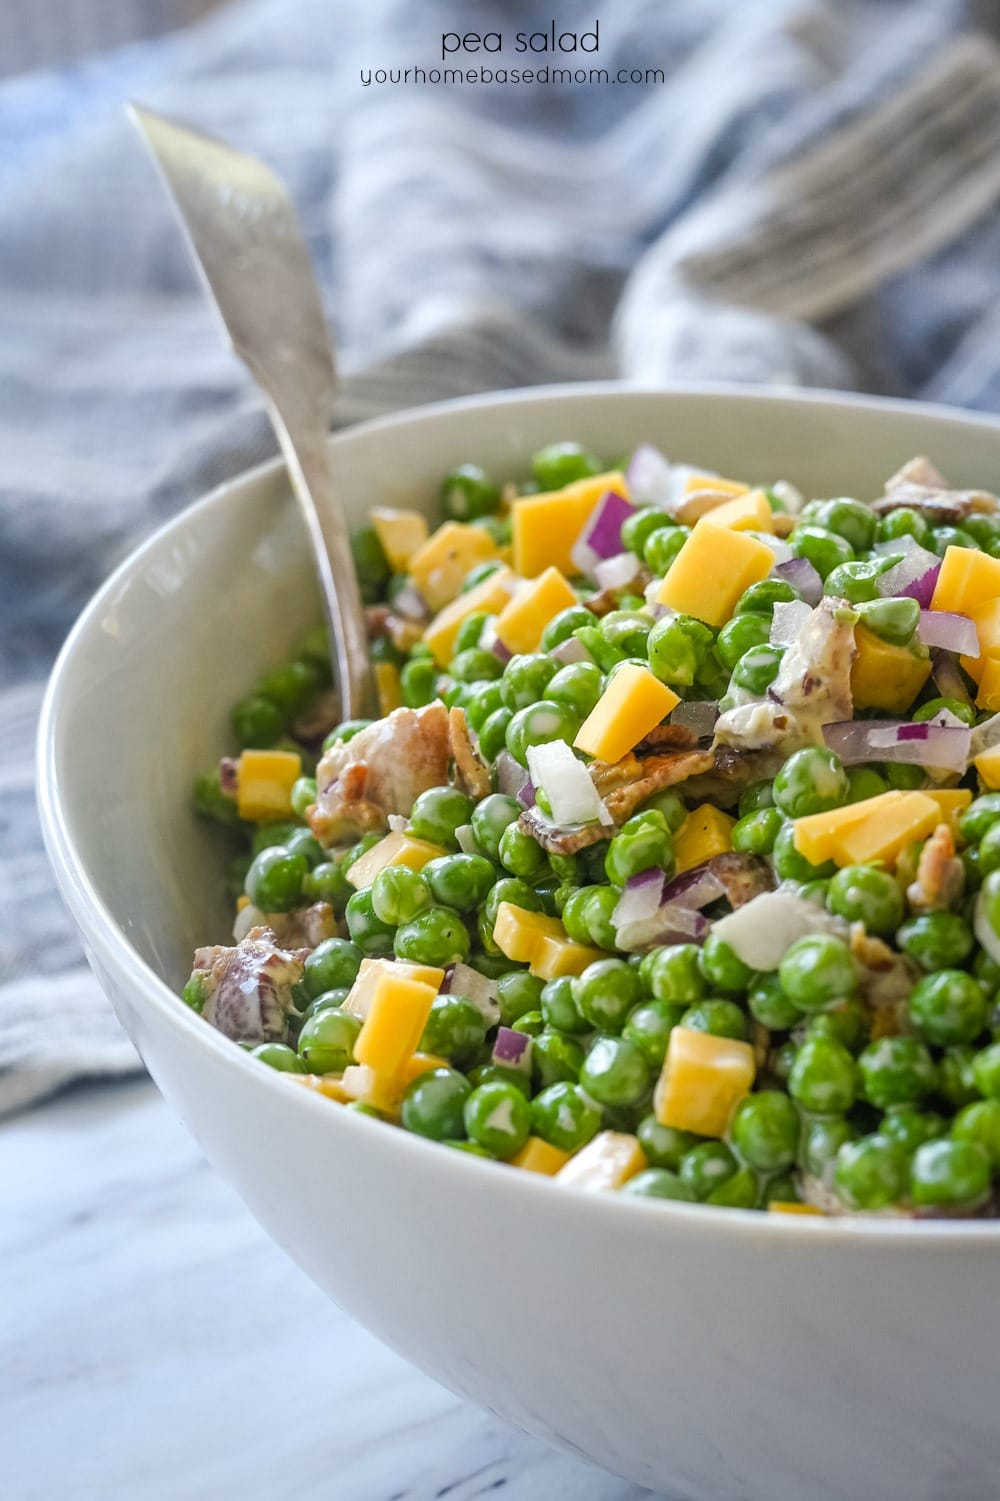 Pea Salad with cheese